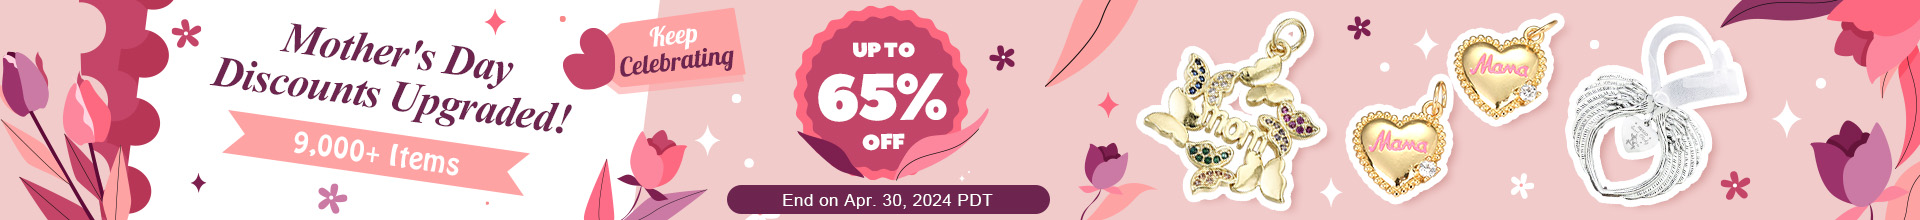 Mother's Day Discounts Upgraded